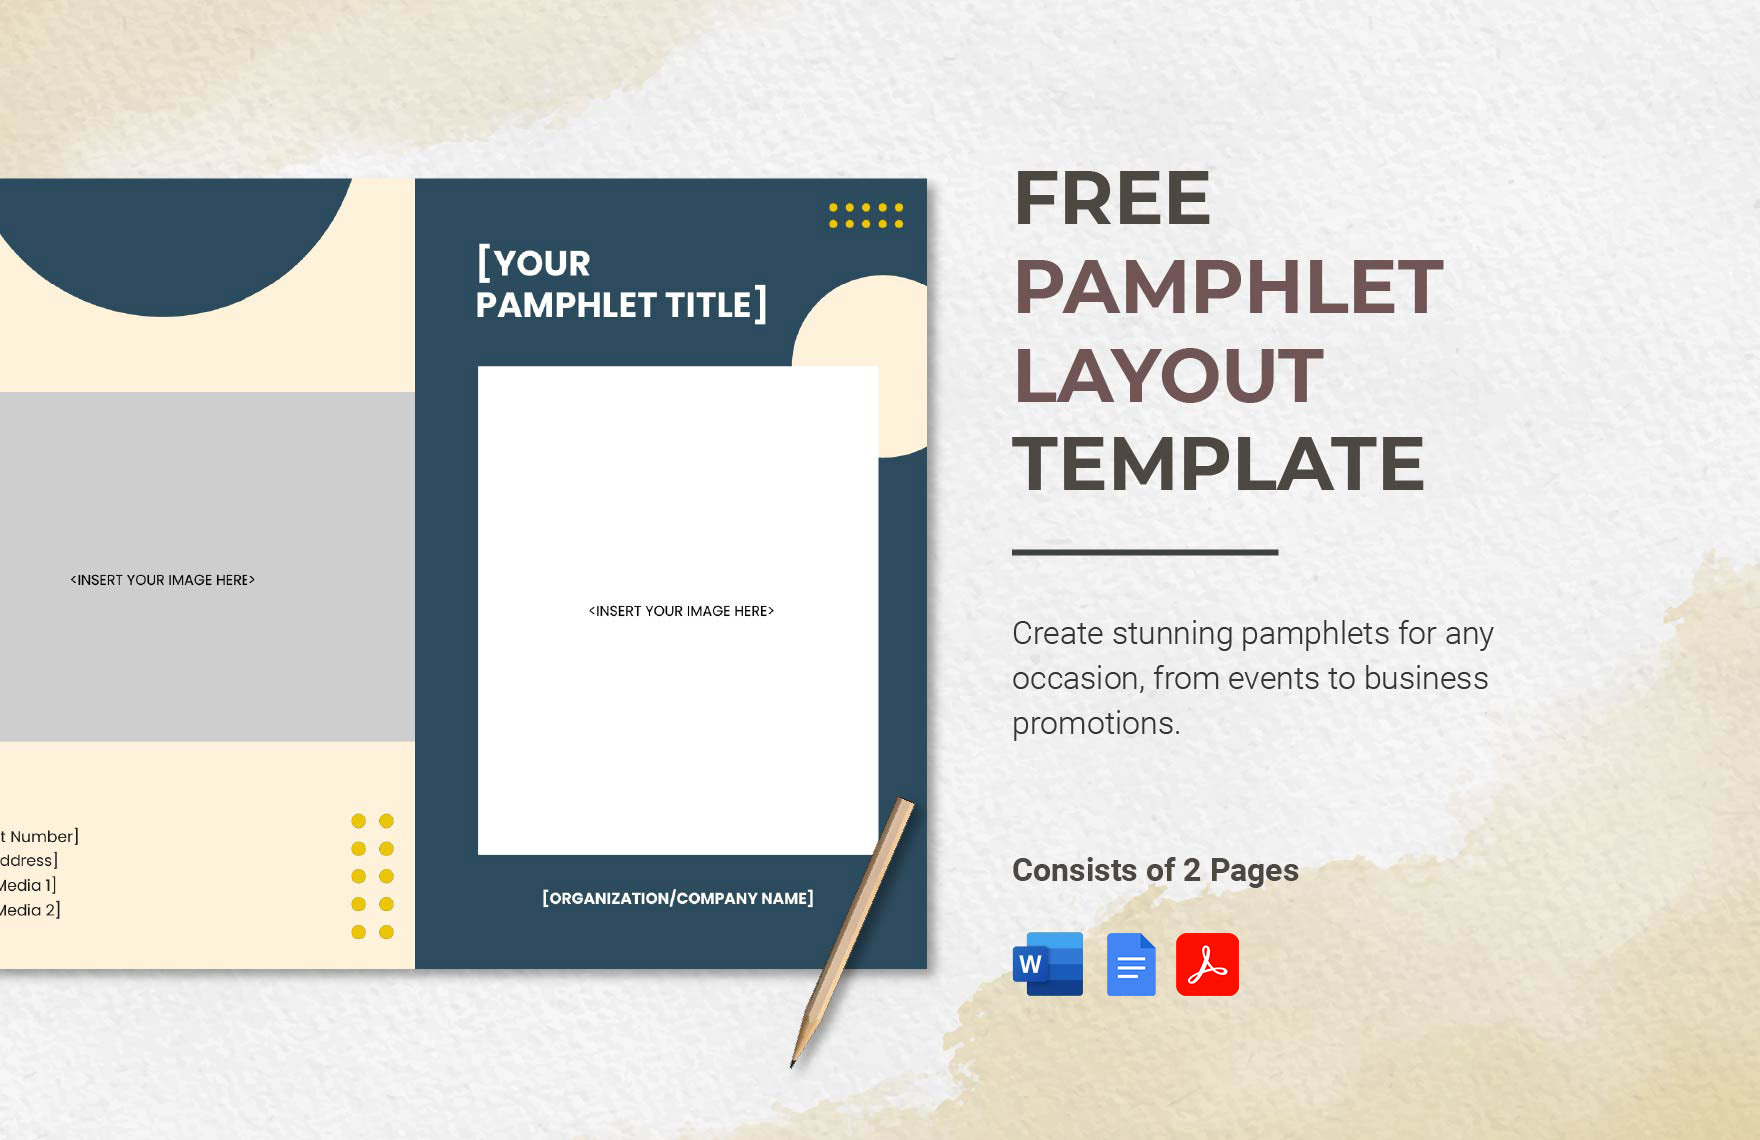 Pamphlet Layout Template in Word, Google Docs, PDF